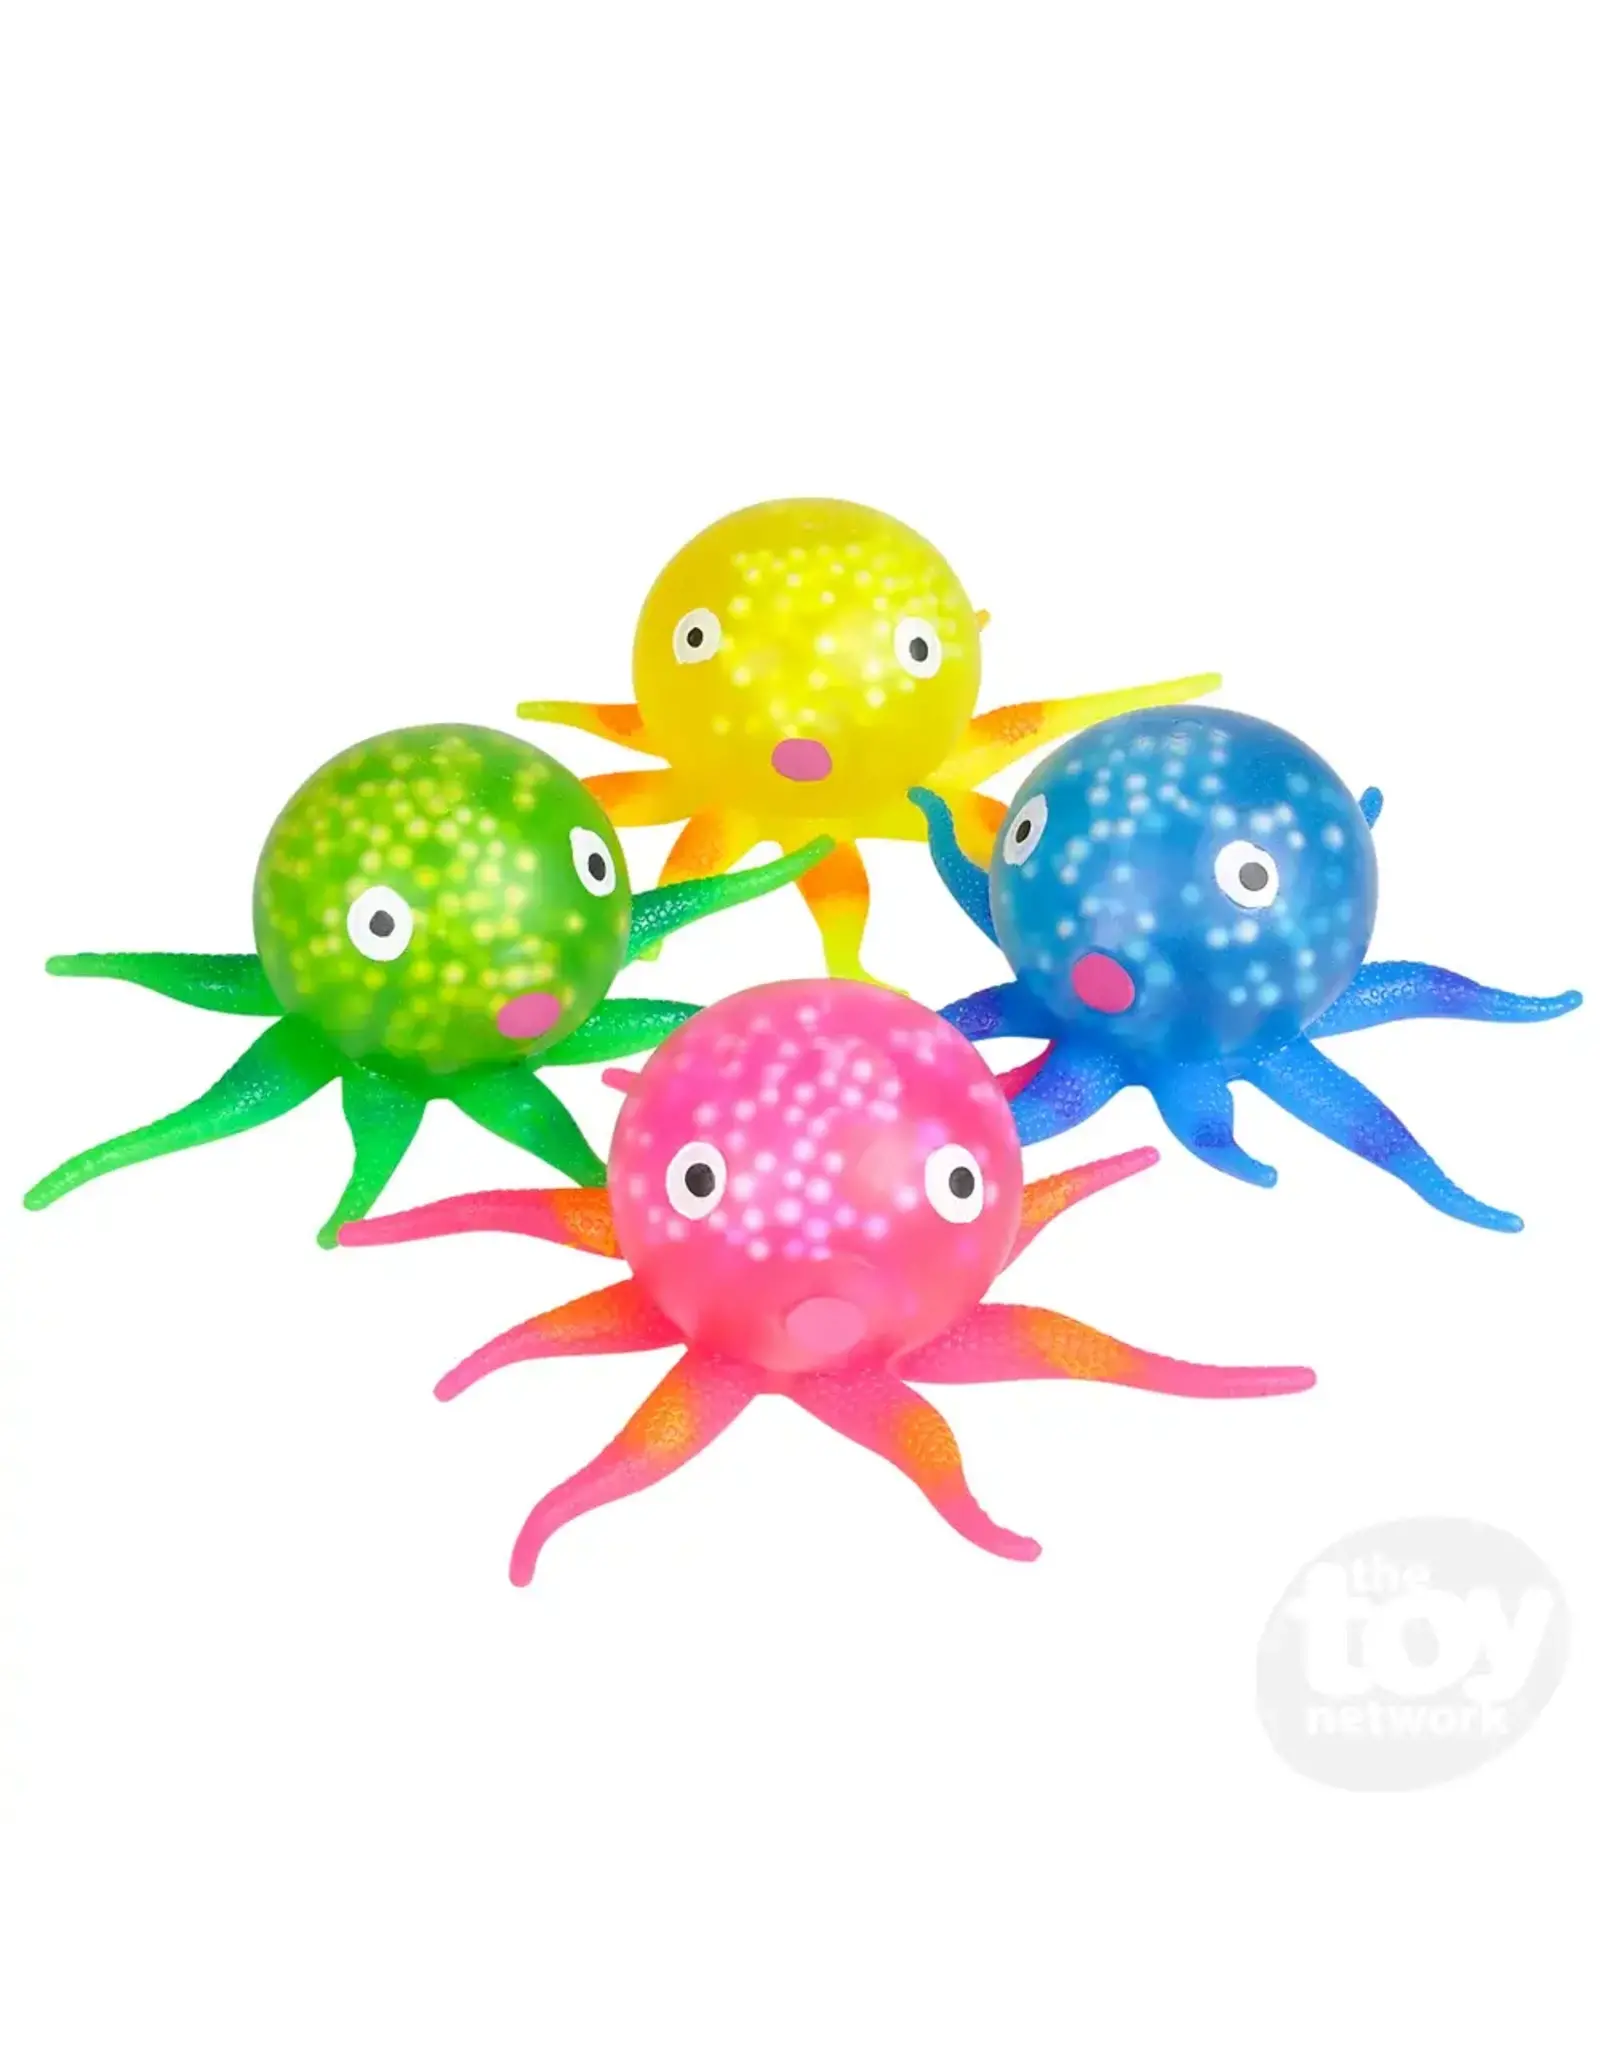 The Toy Network Squeeze Jelly Octopus